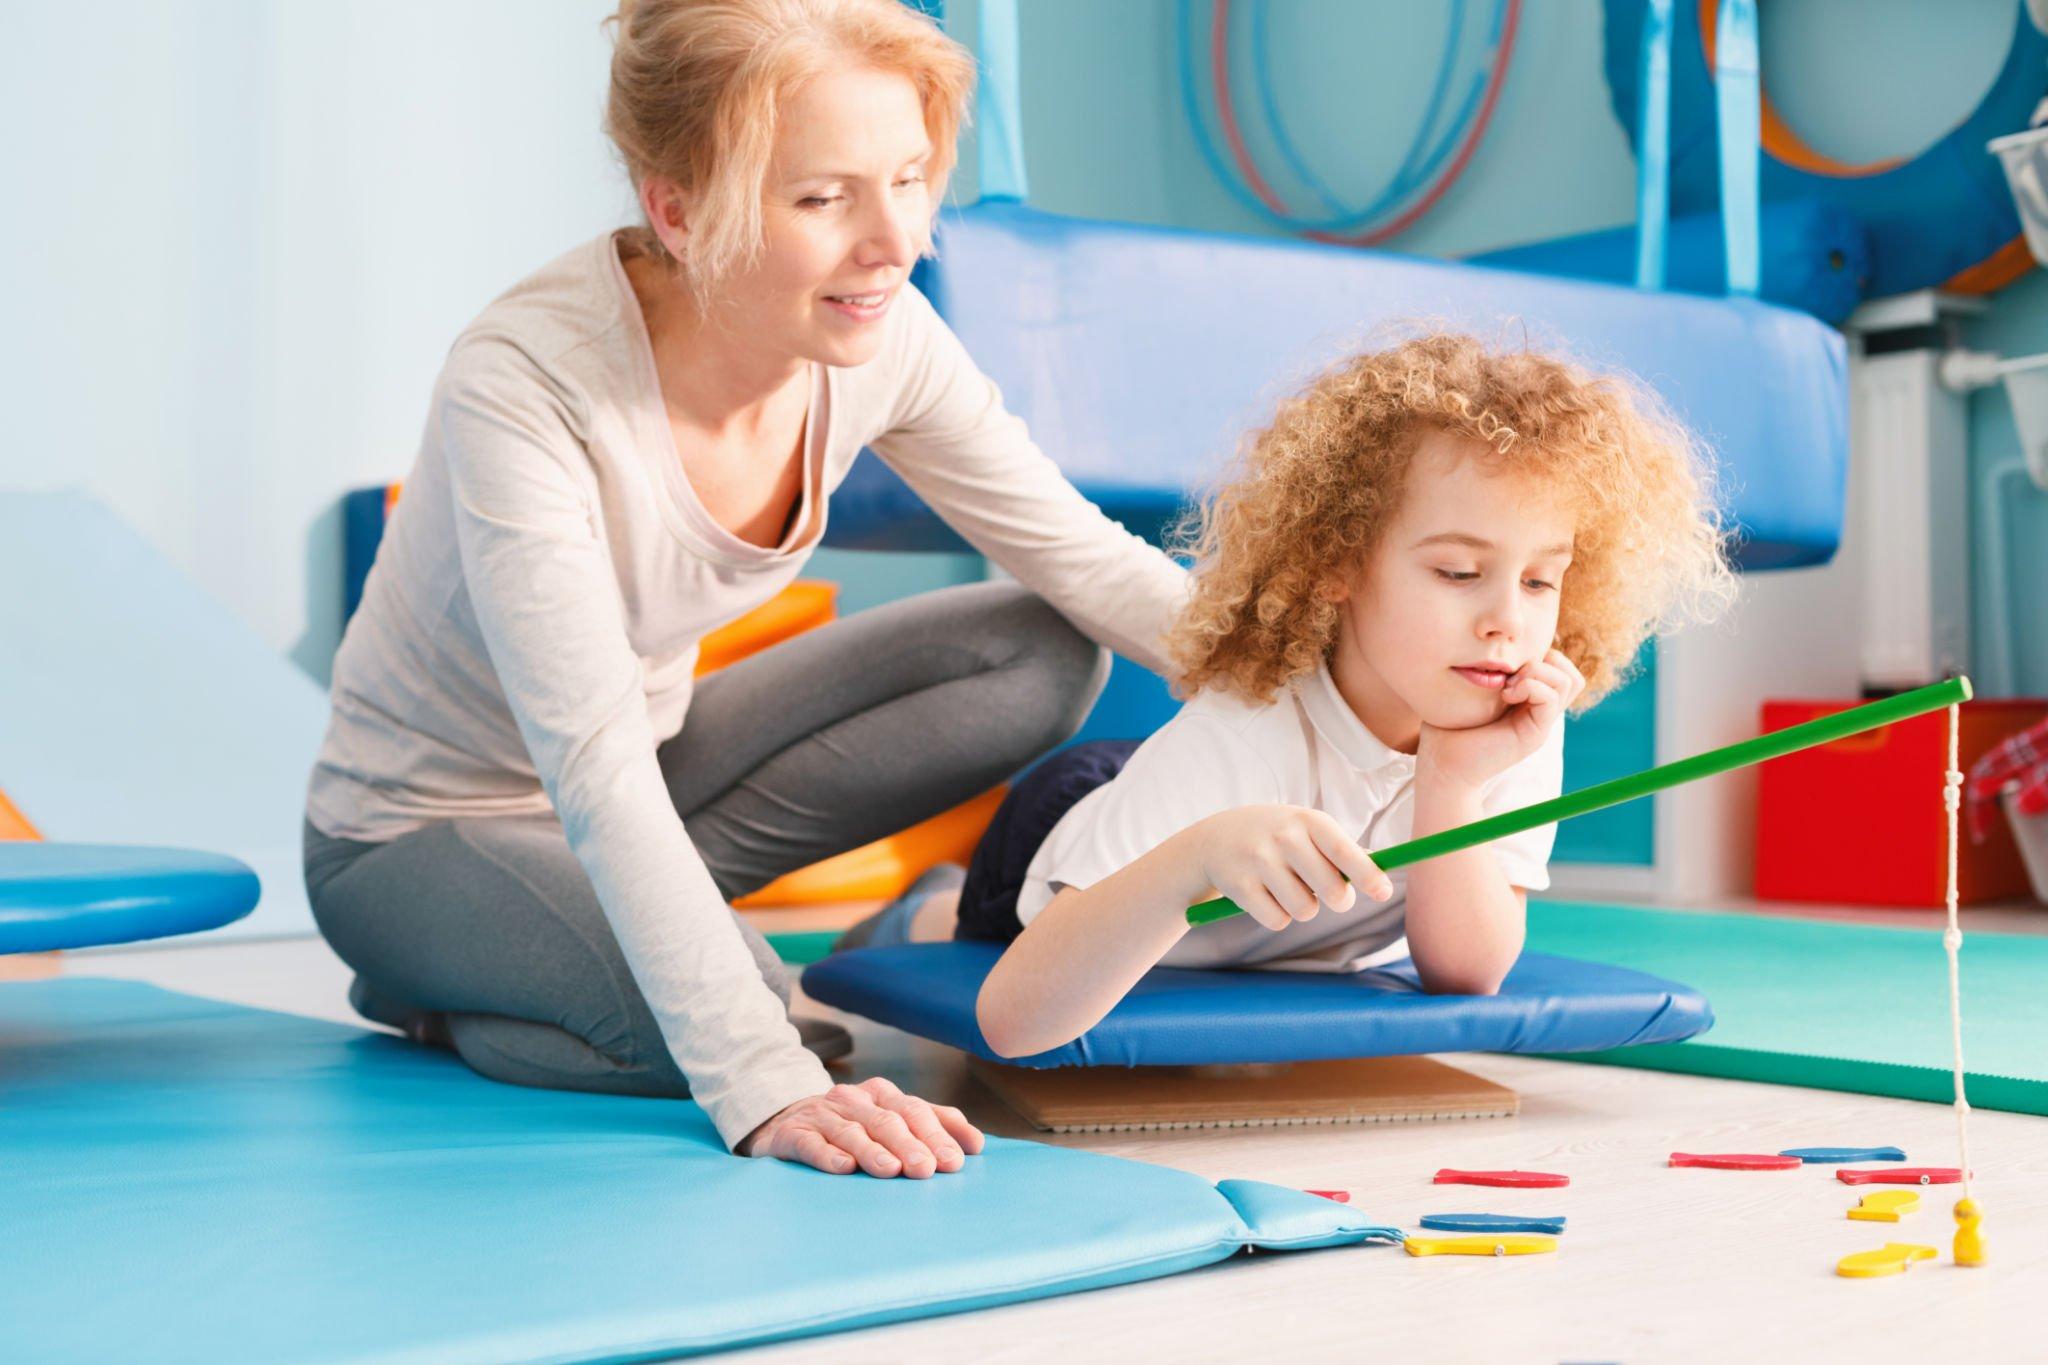 Activities In Occupational Therapy